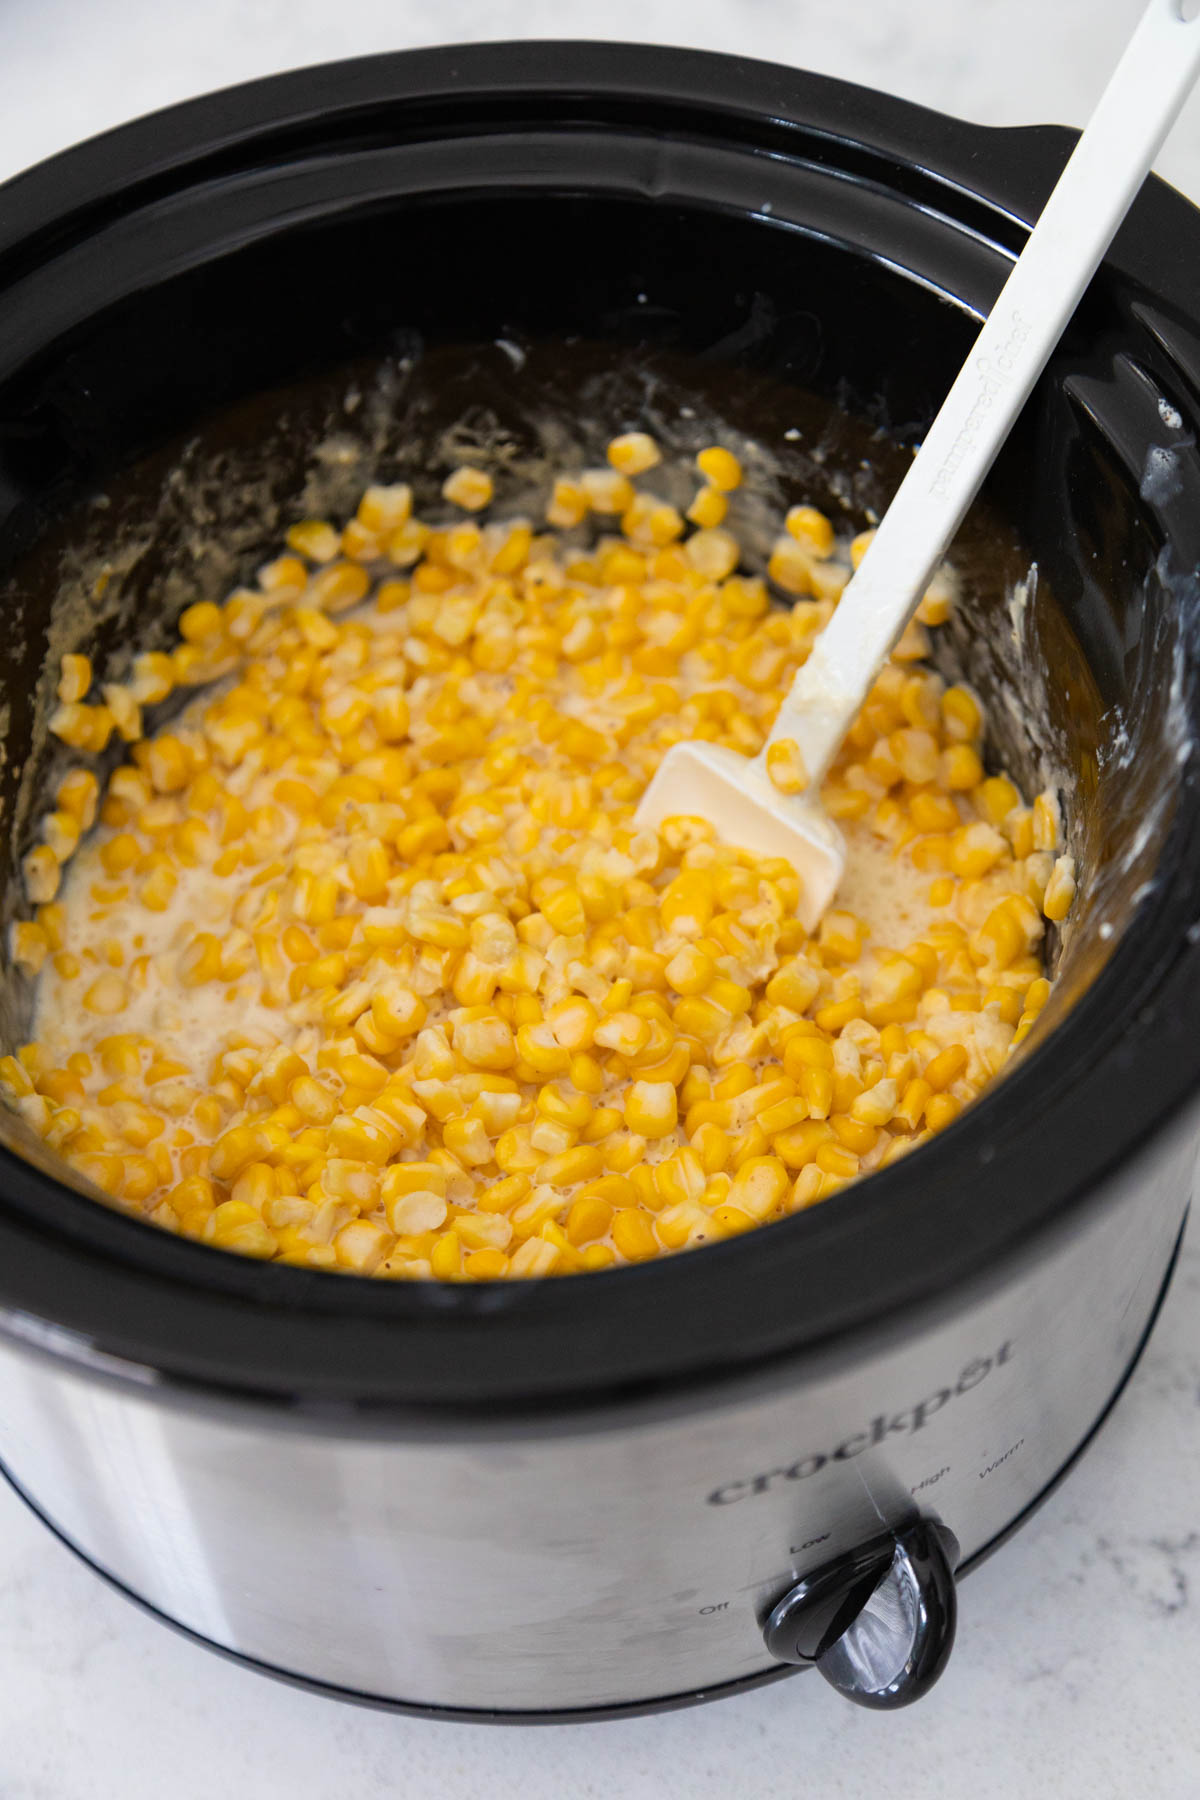 The creamed corn is finished and being stirred by a spatula in the Crock Pot.